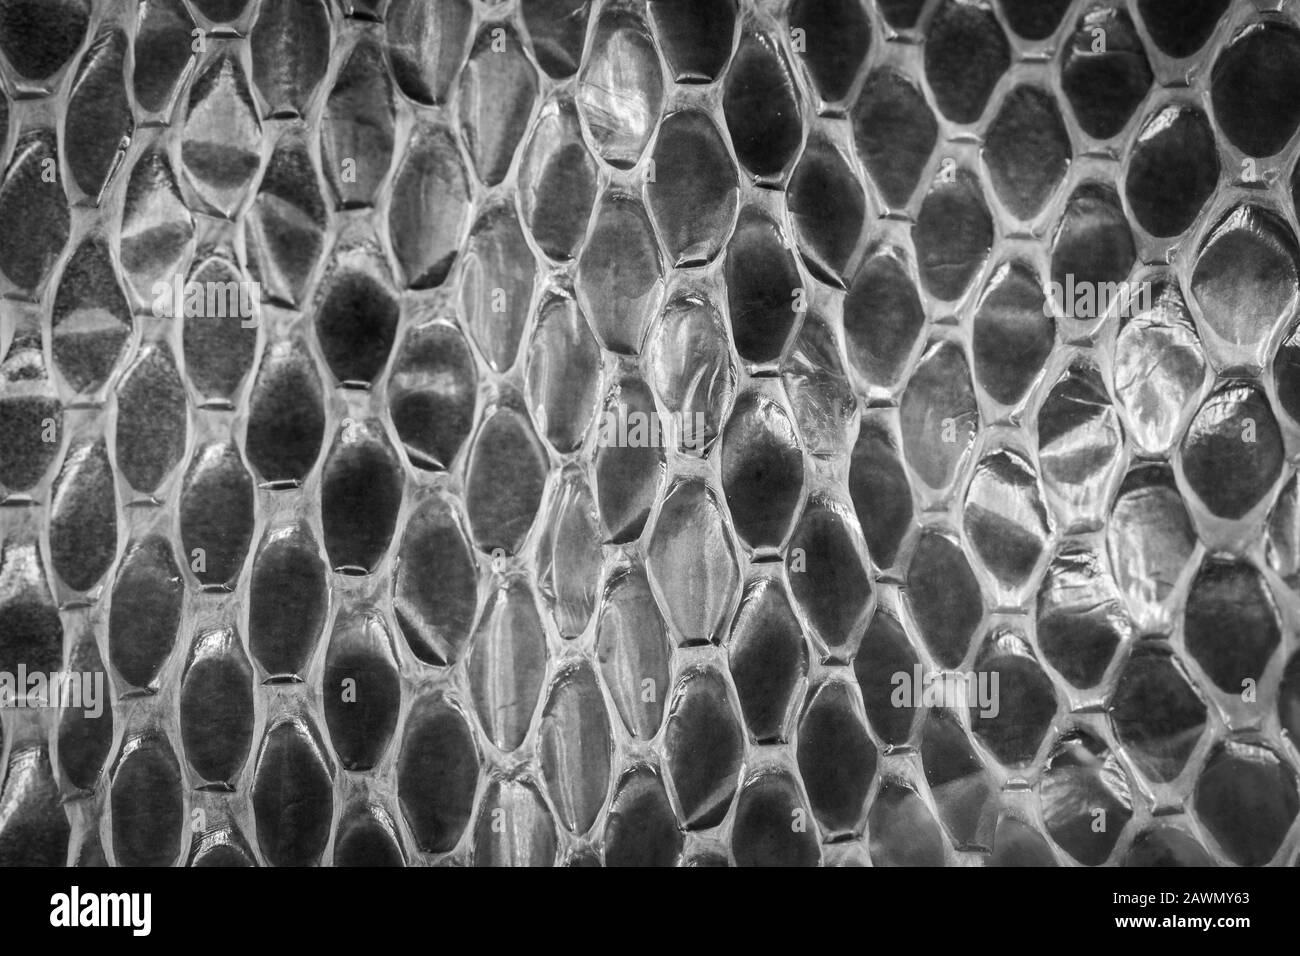 Shed snake skin scales in monochrome Stock Photo